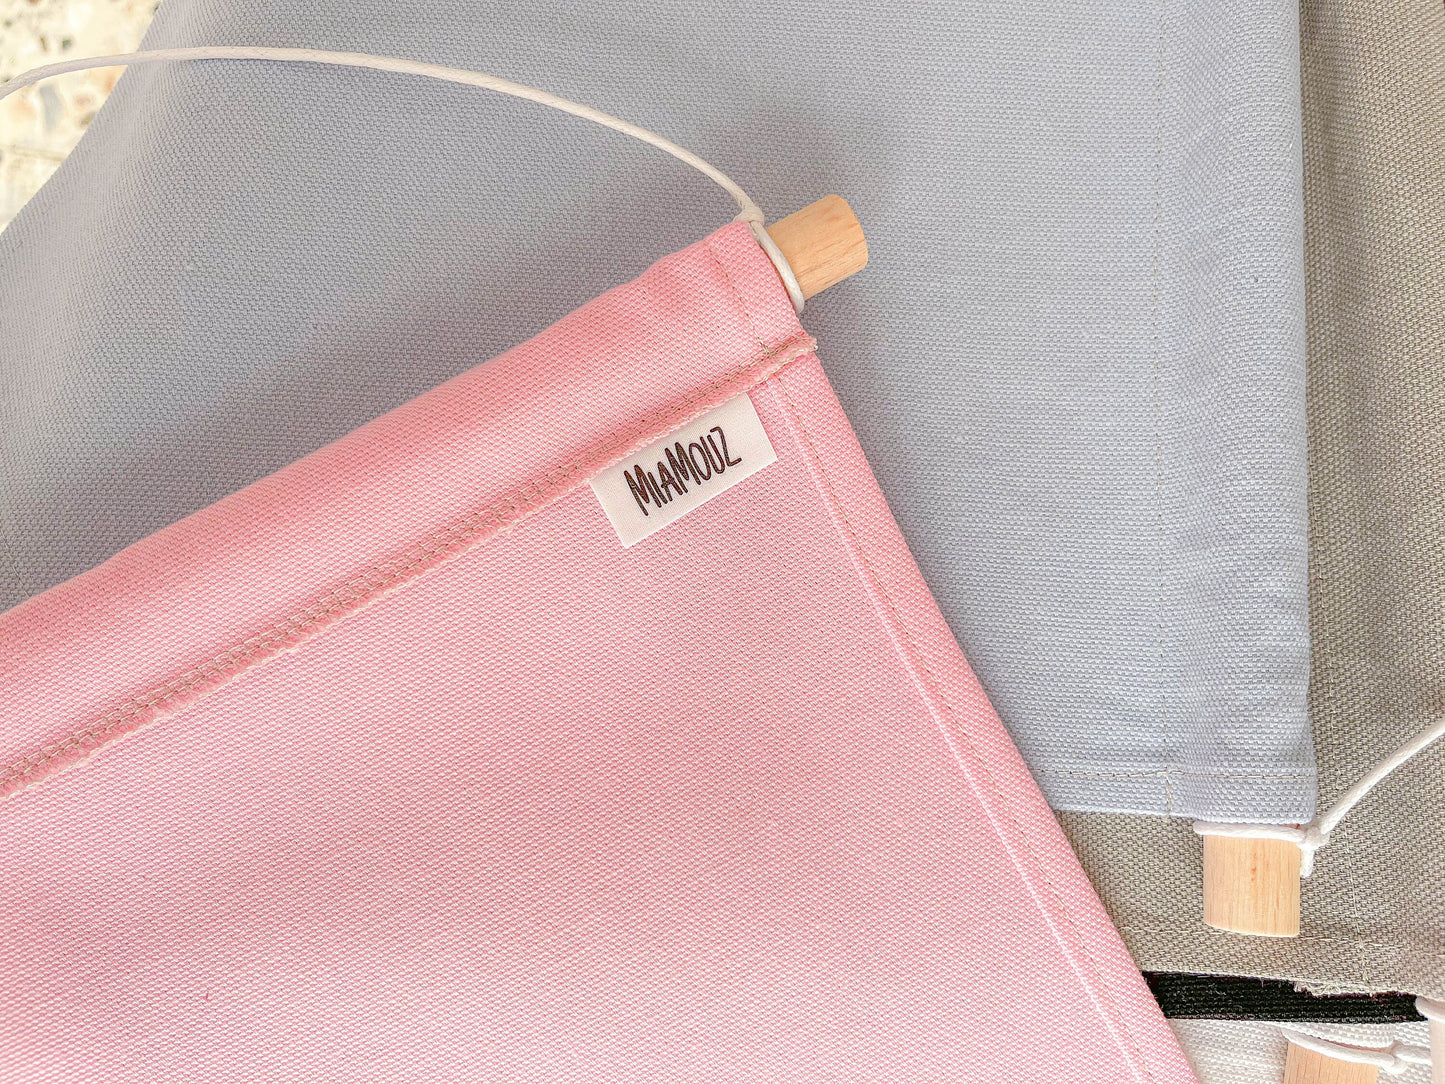 Cute Cotton Pin Banner | L 21cm x 30cm | Handmade in Germany | Light Pink Canvas Fabric | Classic Pin Display